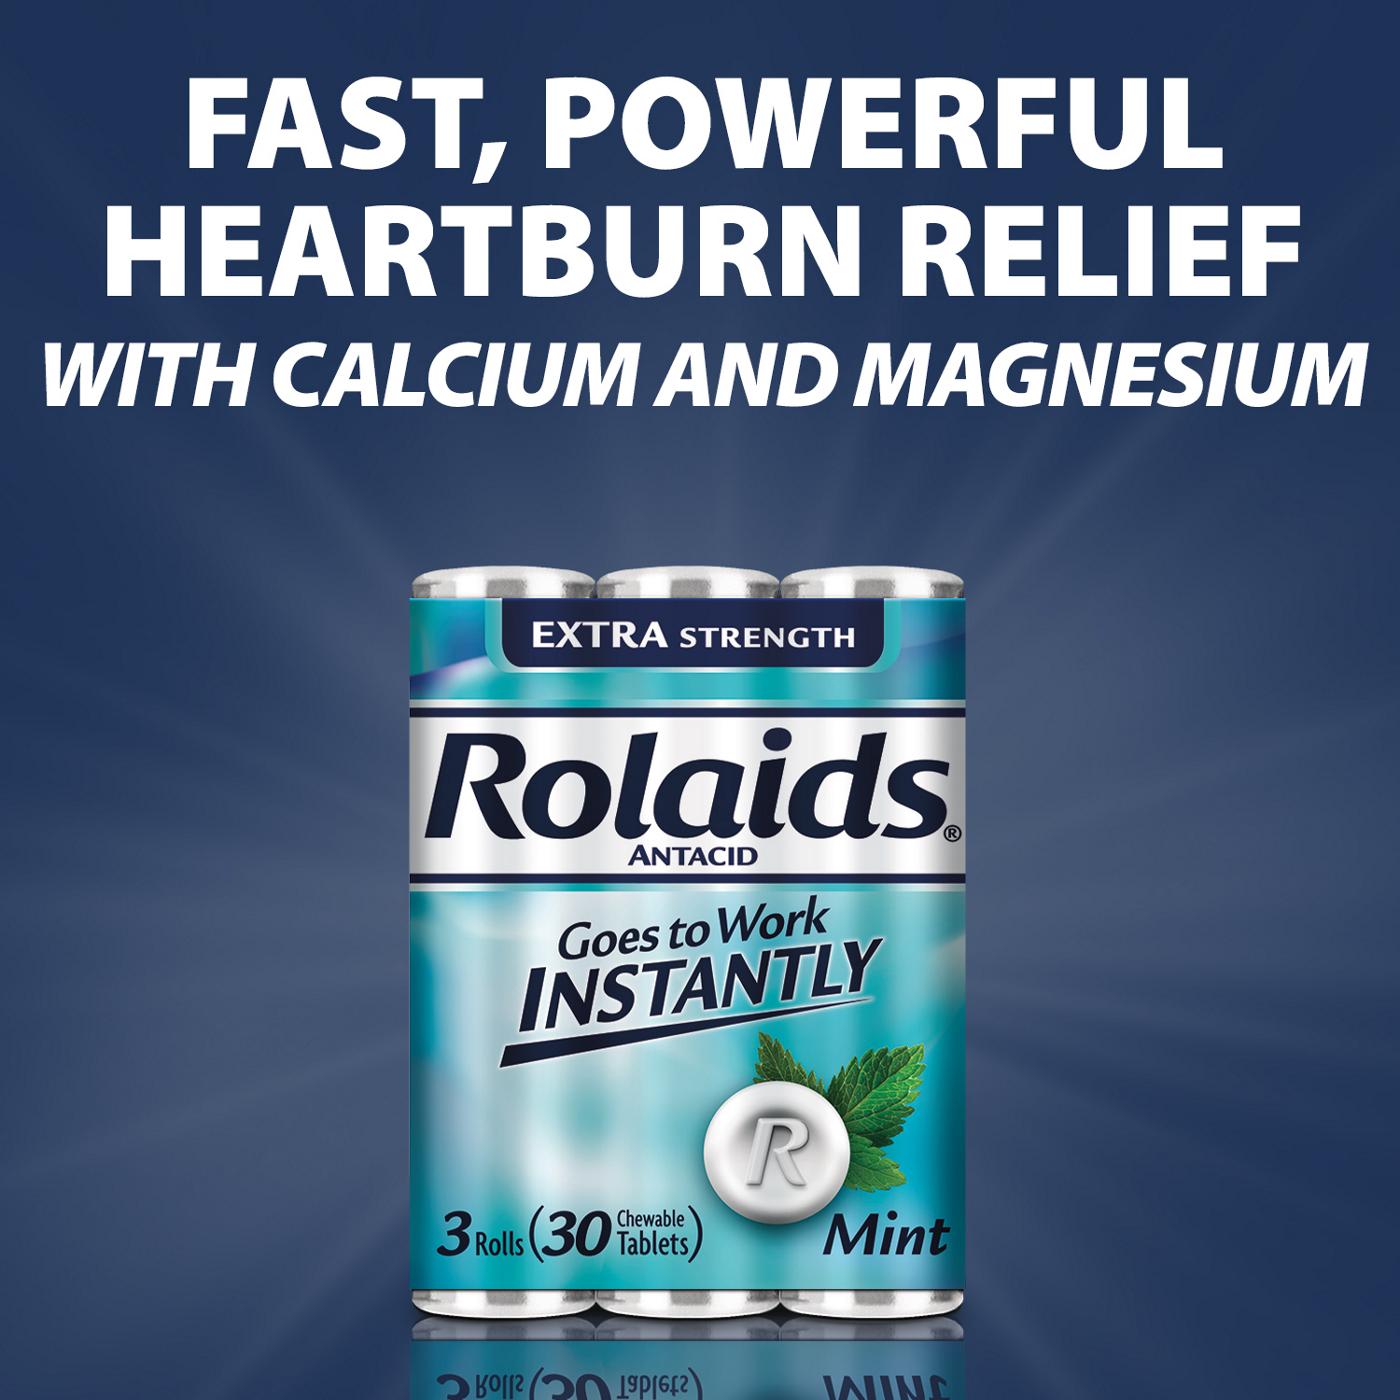 Rolaids 3 Roll Packs Extra Strength Tablets Mint; image 5 of 6